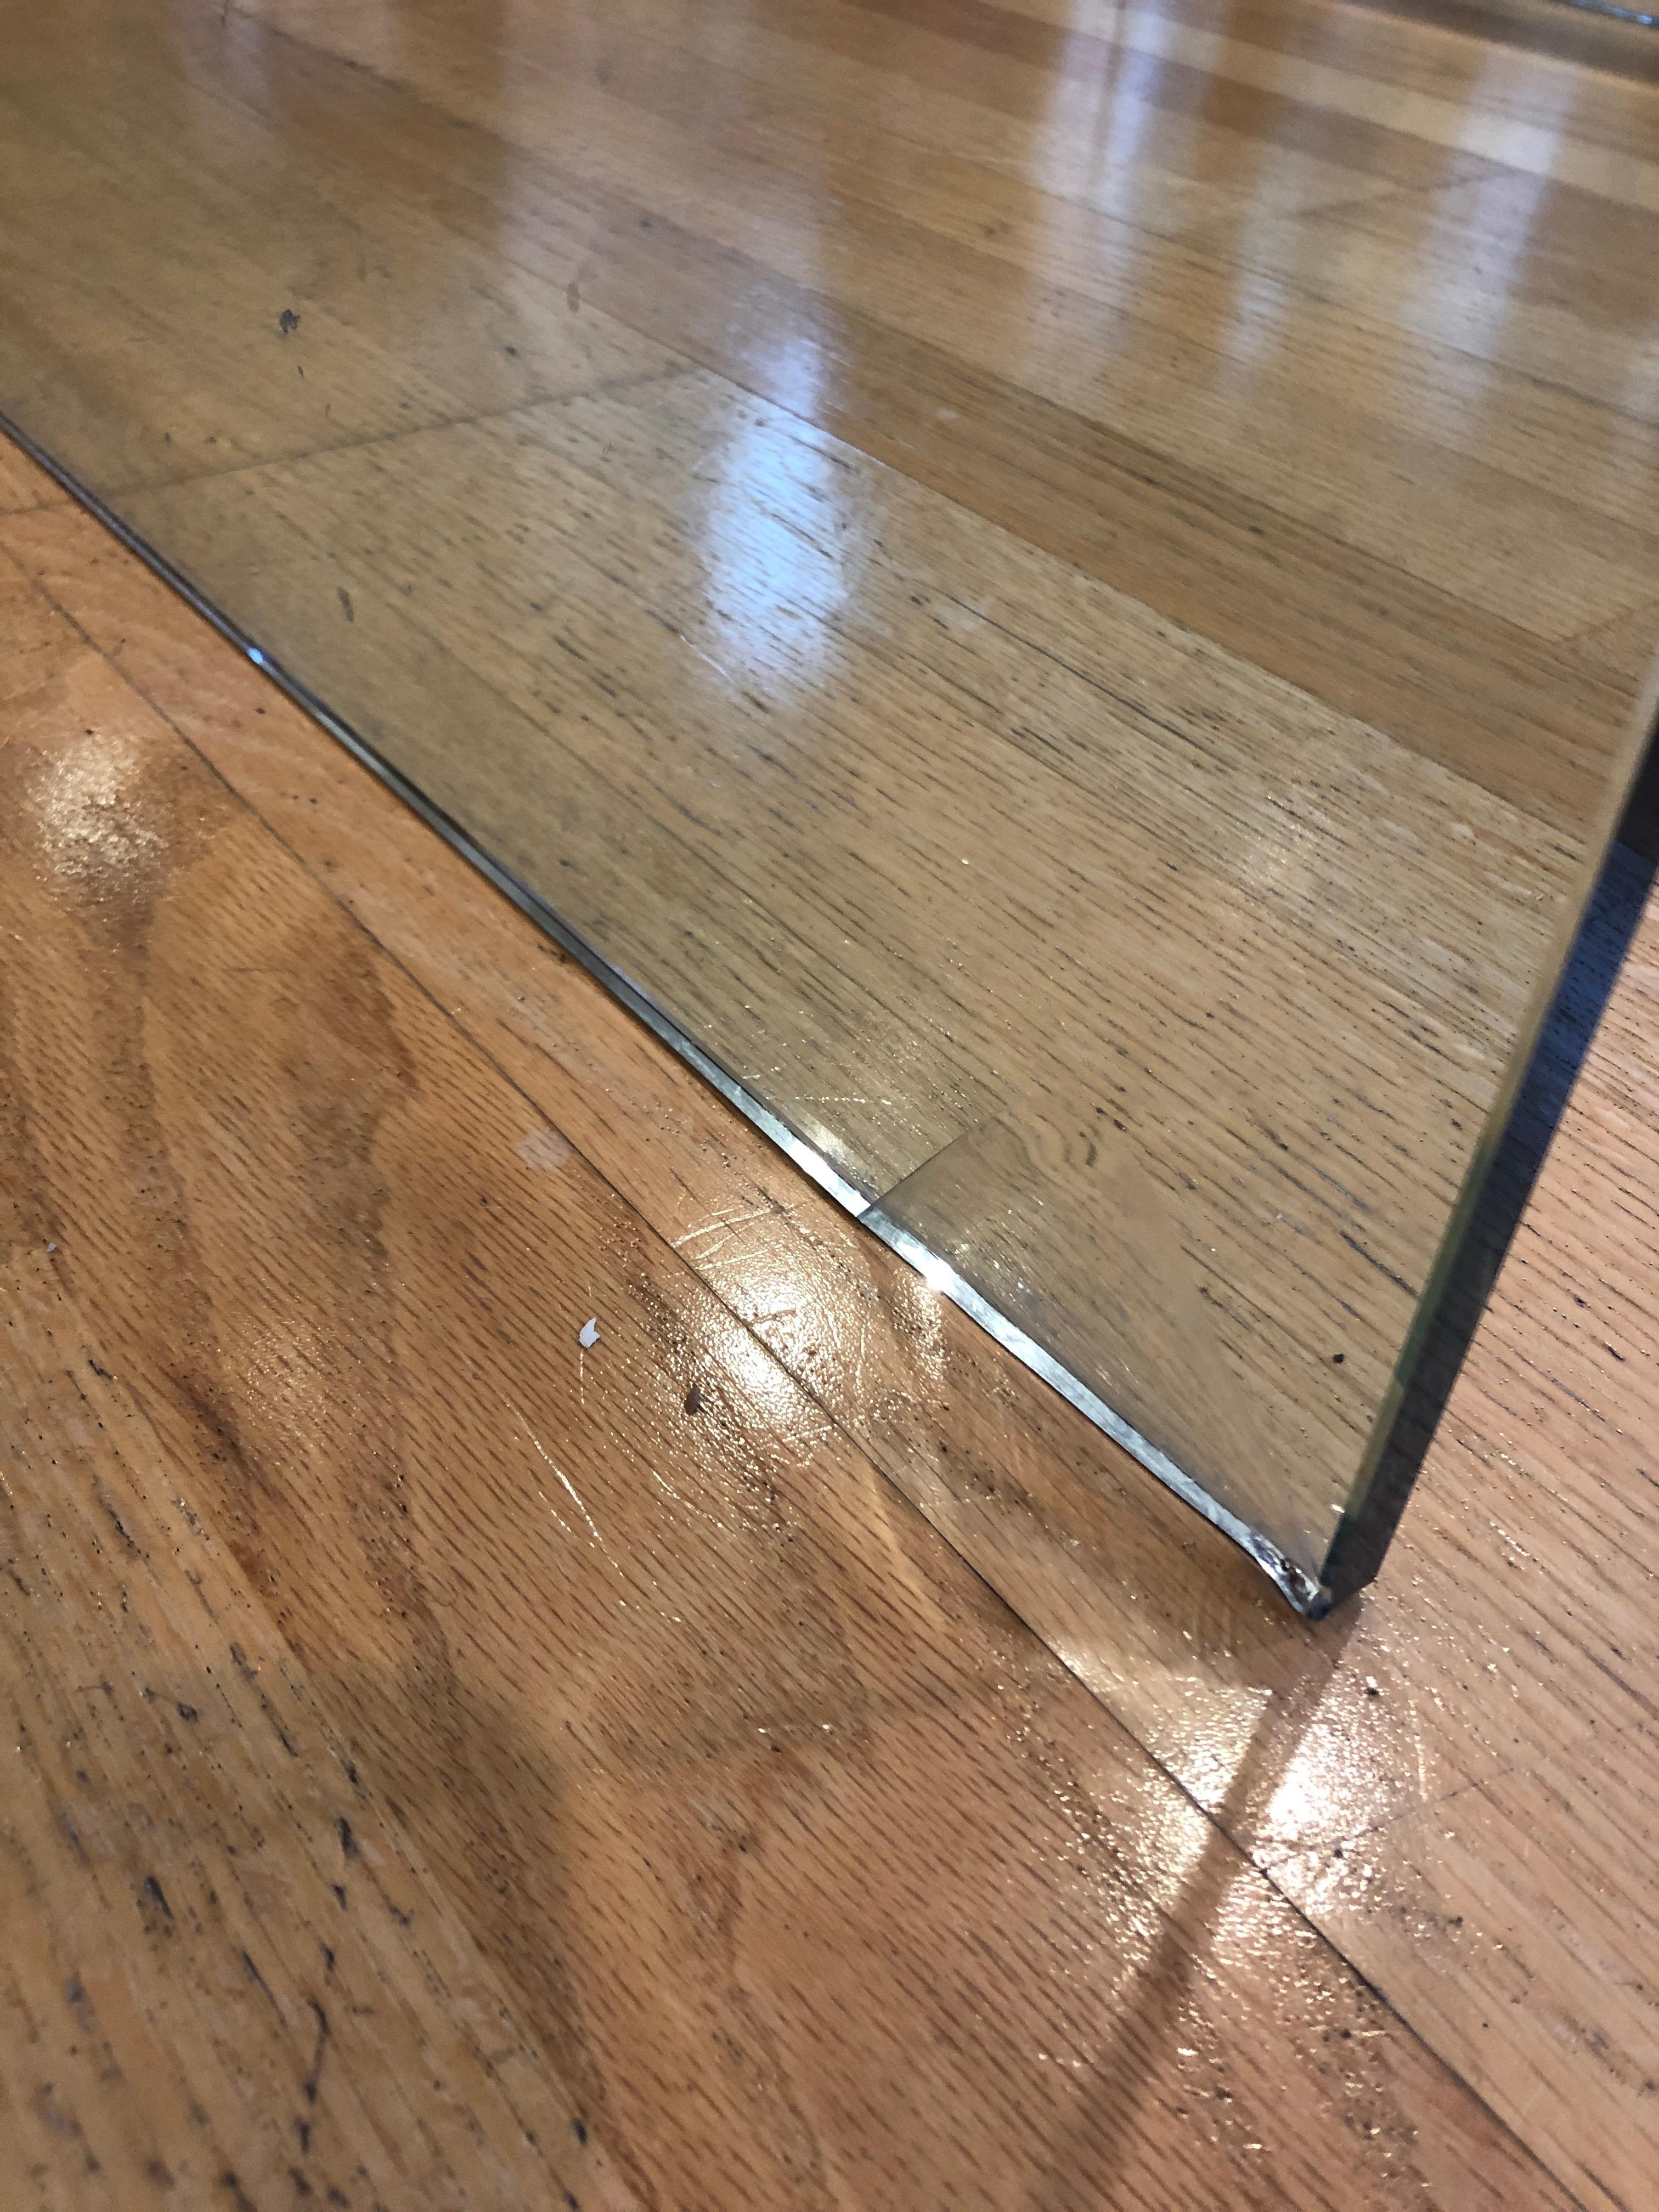 Sleek heavy glass waterfall style Mid-Century Modern coffee table made in Italy.